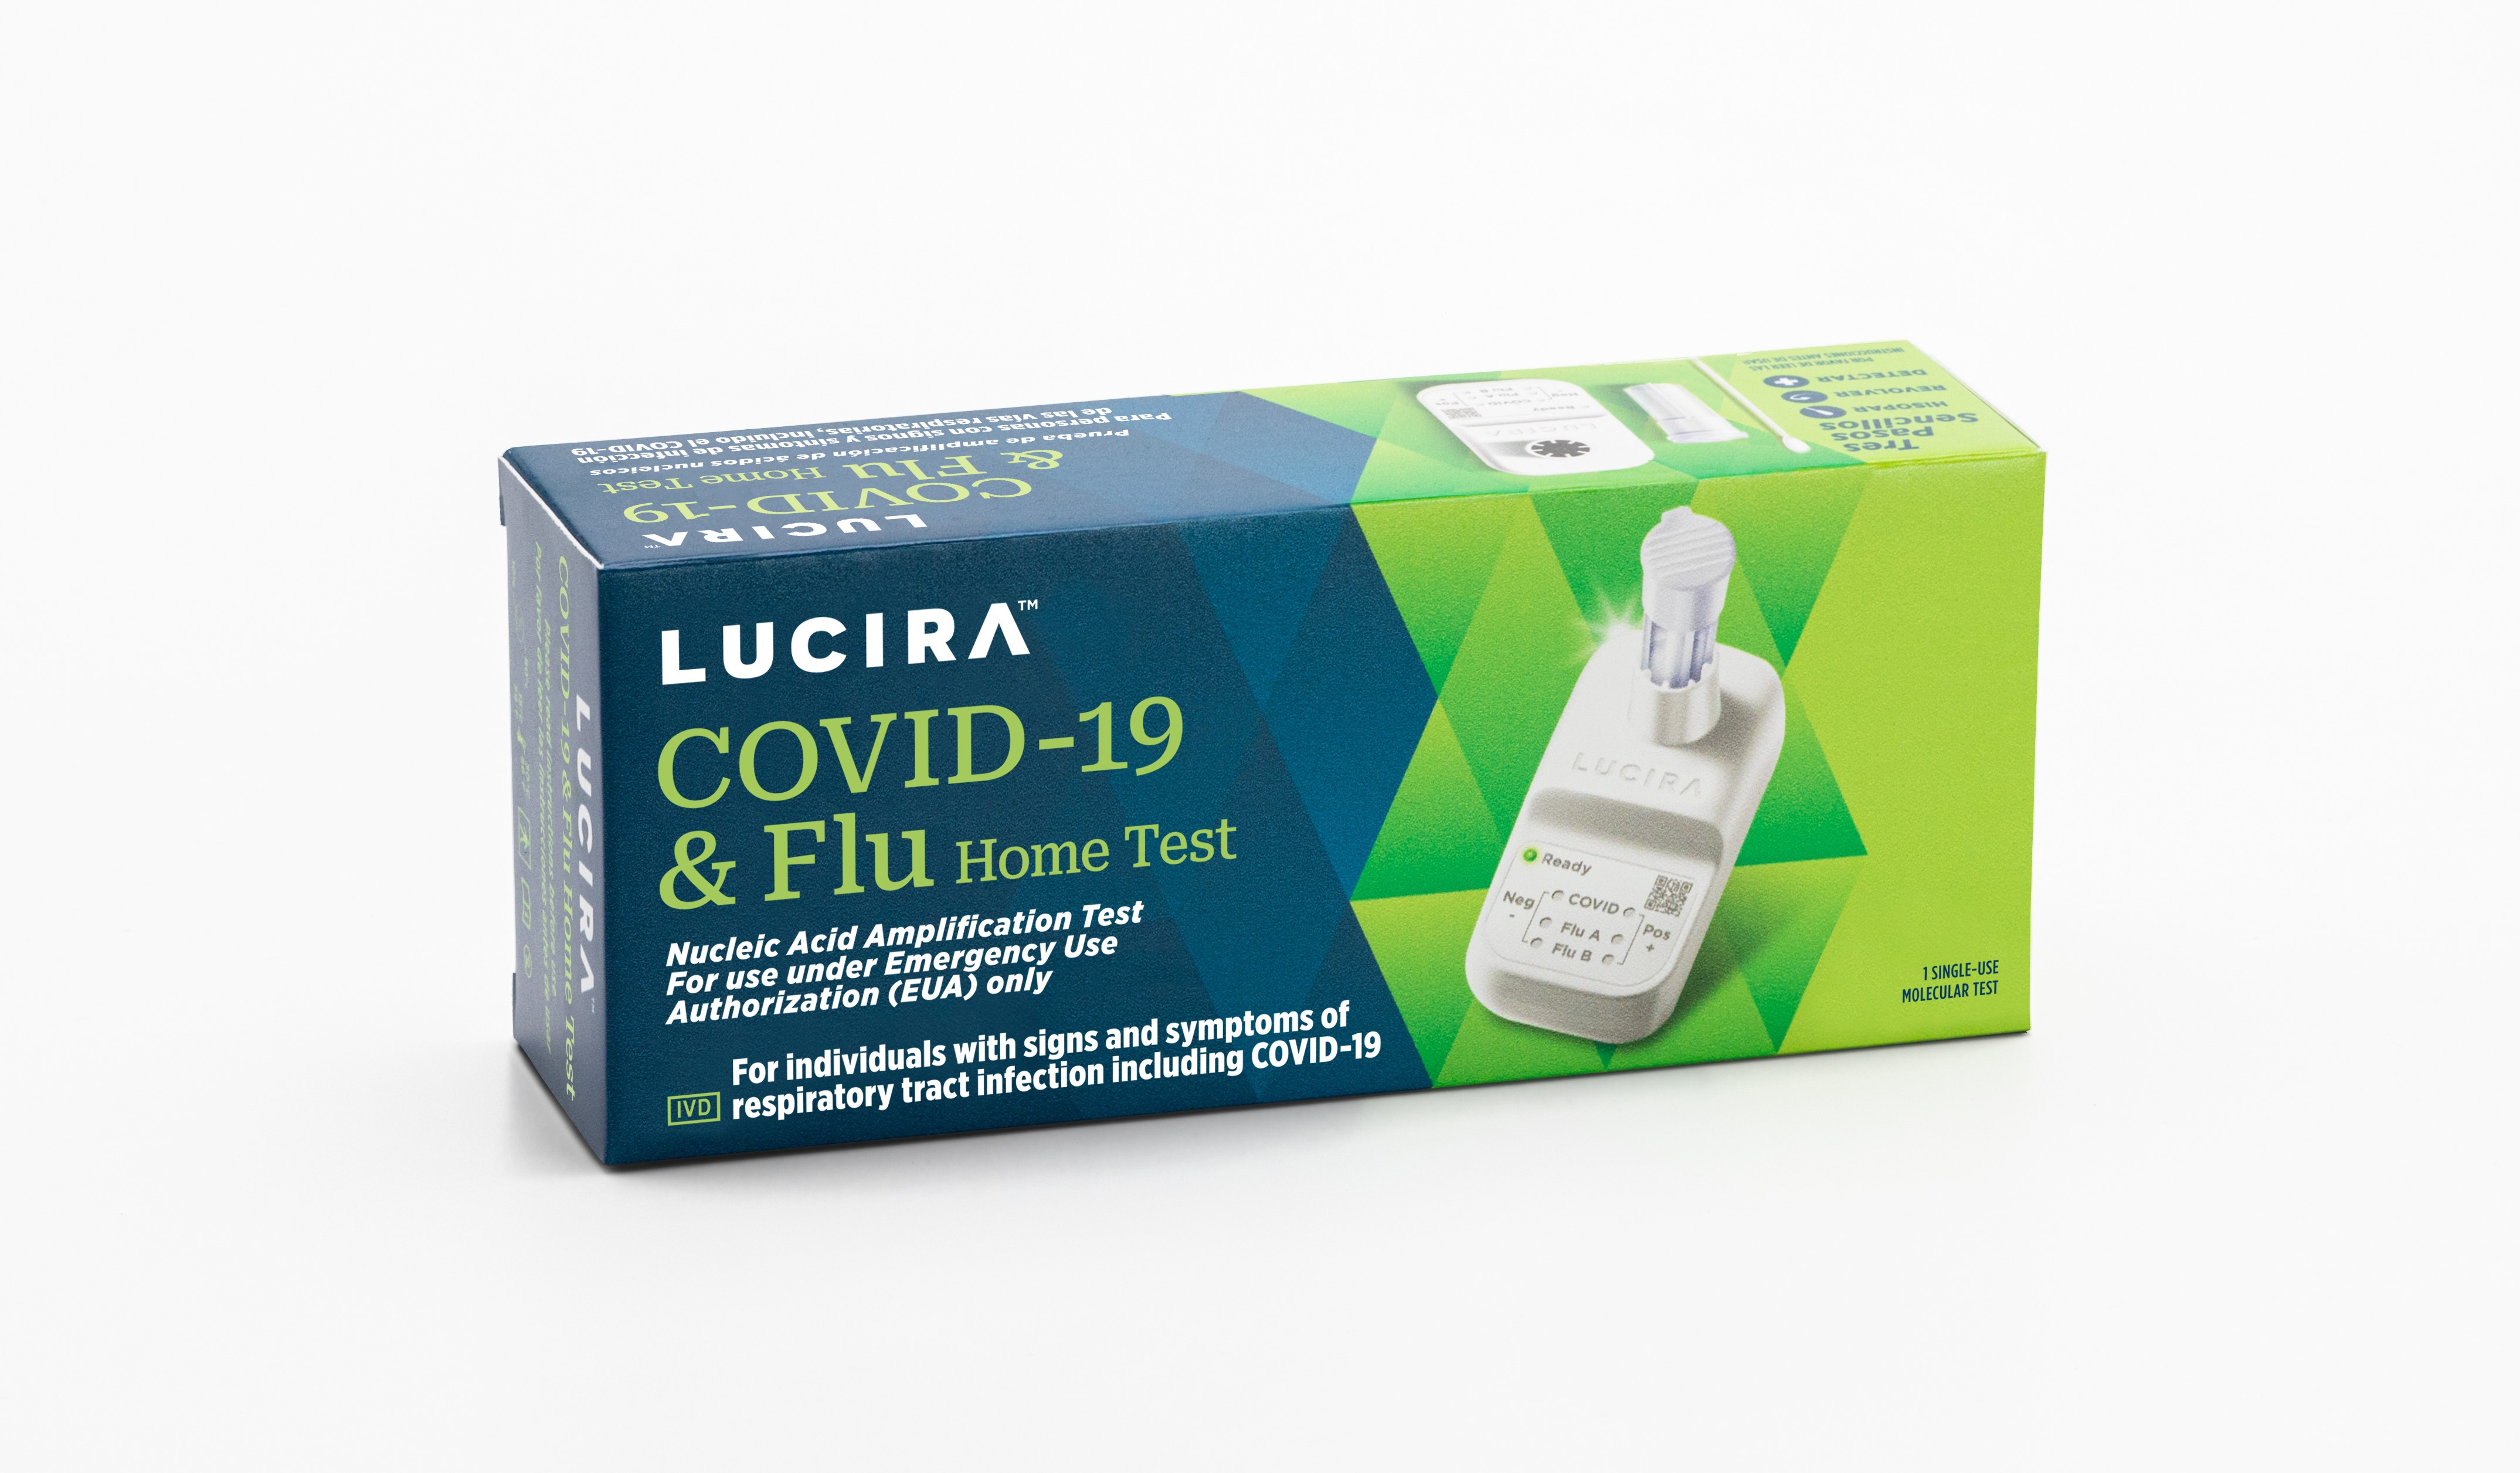 Lucira COVID-19 &amp; Flu Home Test – The First OTC Test to Diagnose Flu at Home in History